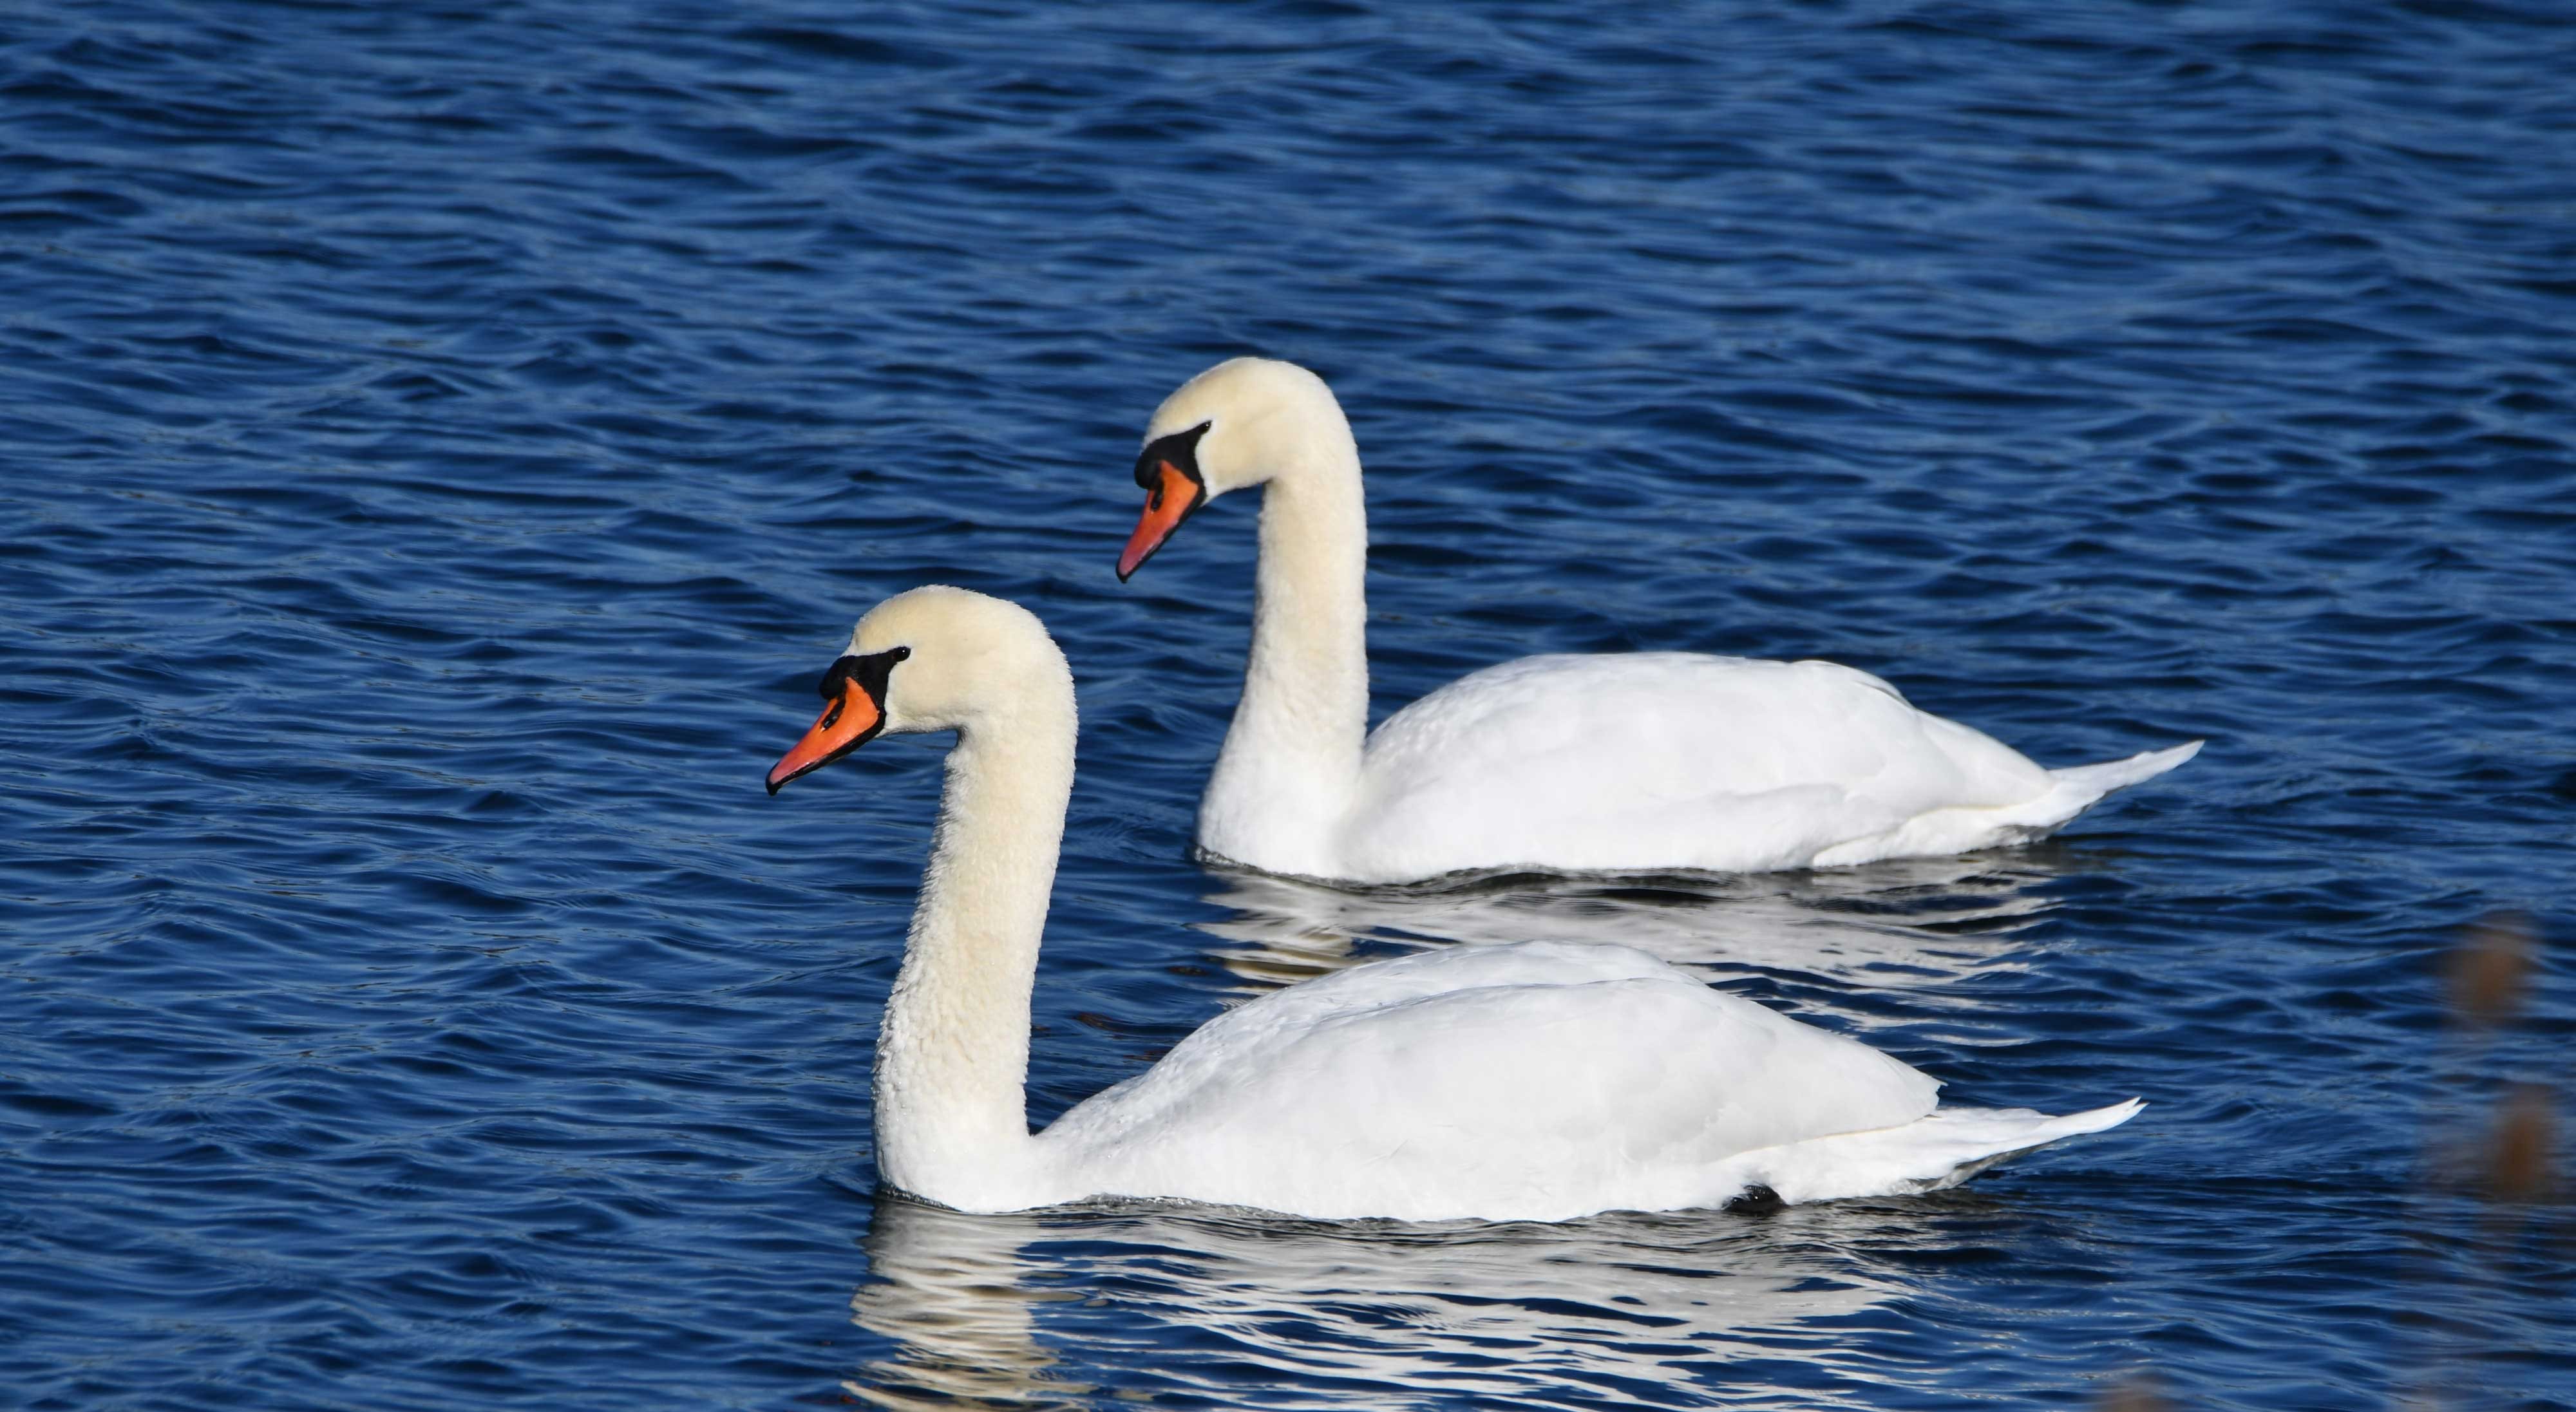 Two swans swimming in water.